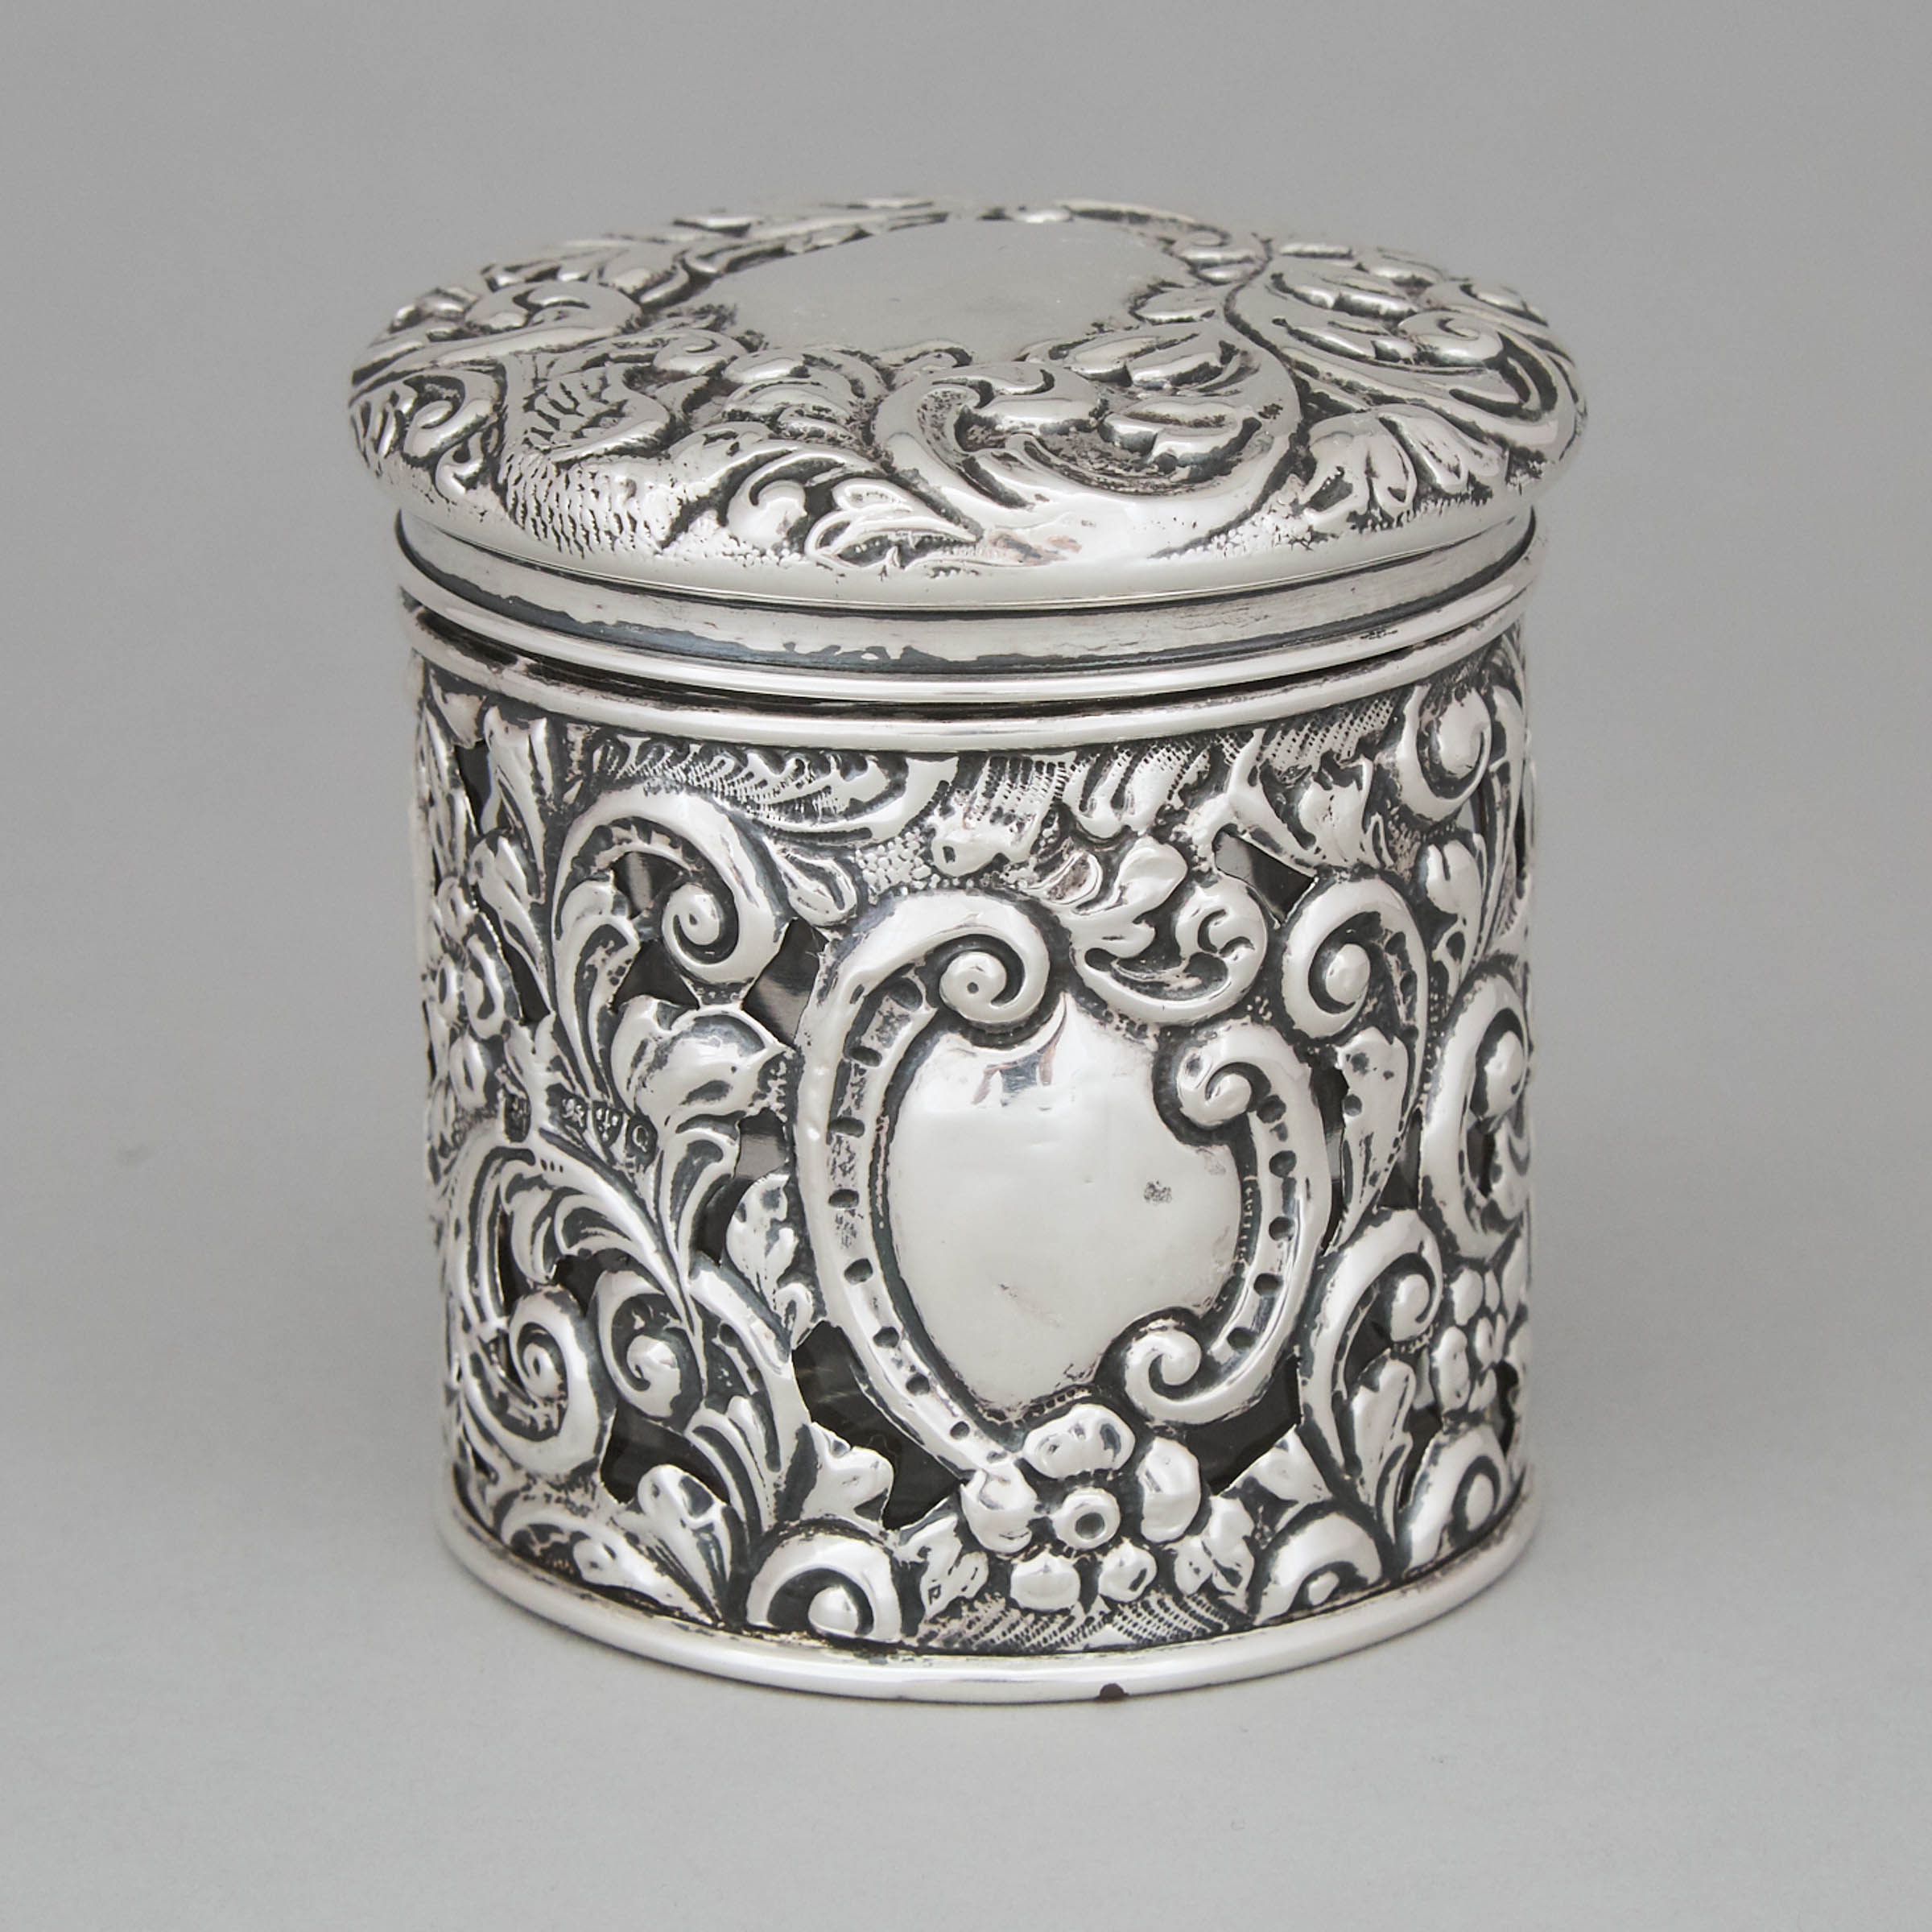 Late Victorian Repoussé Silver Mounted Glass Jar, James Deakin & Sons, Chester, 1899